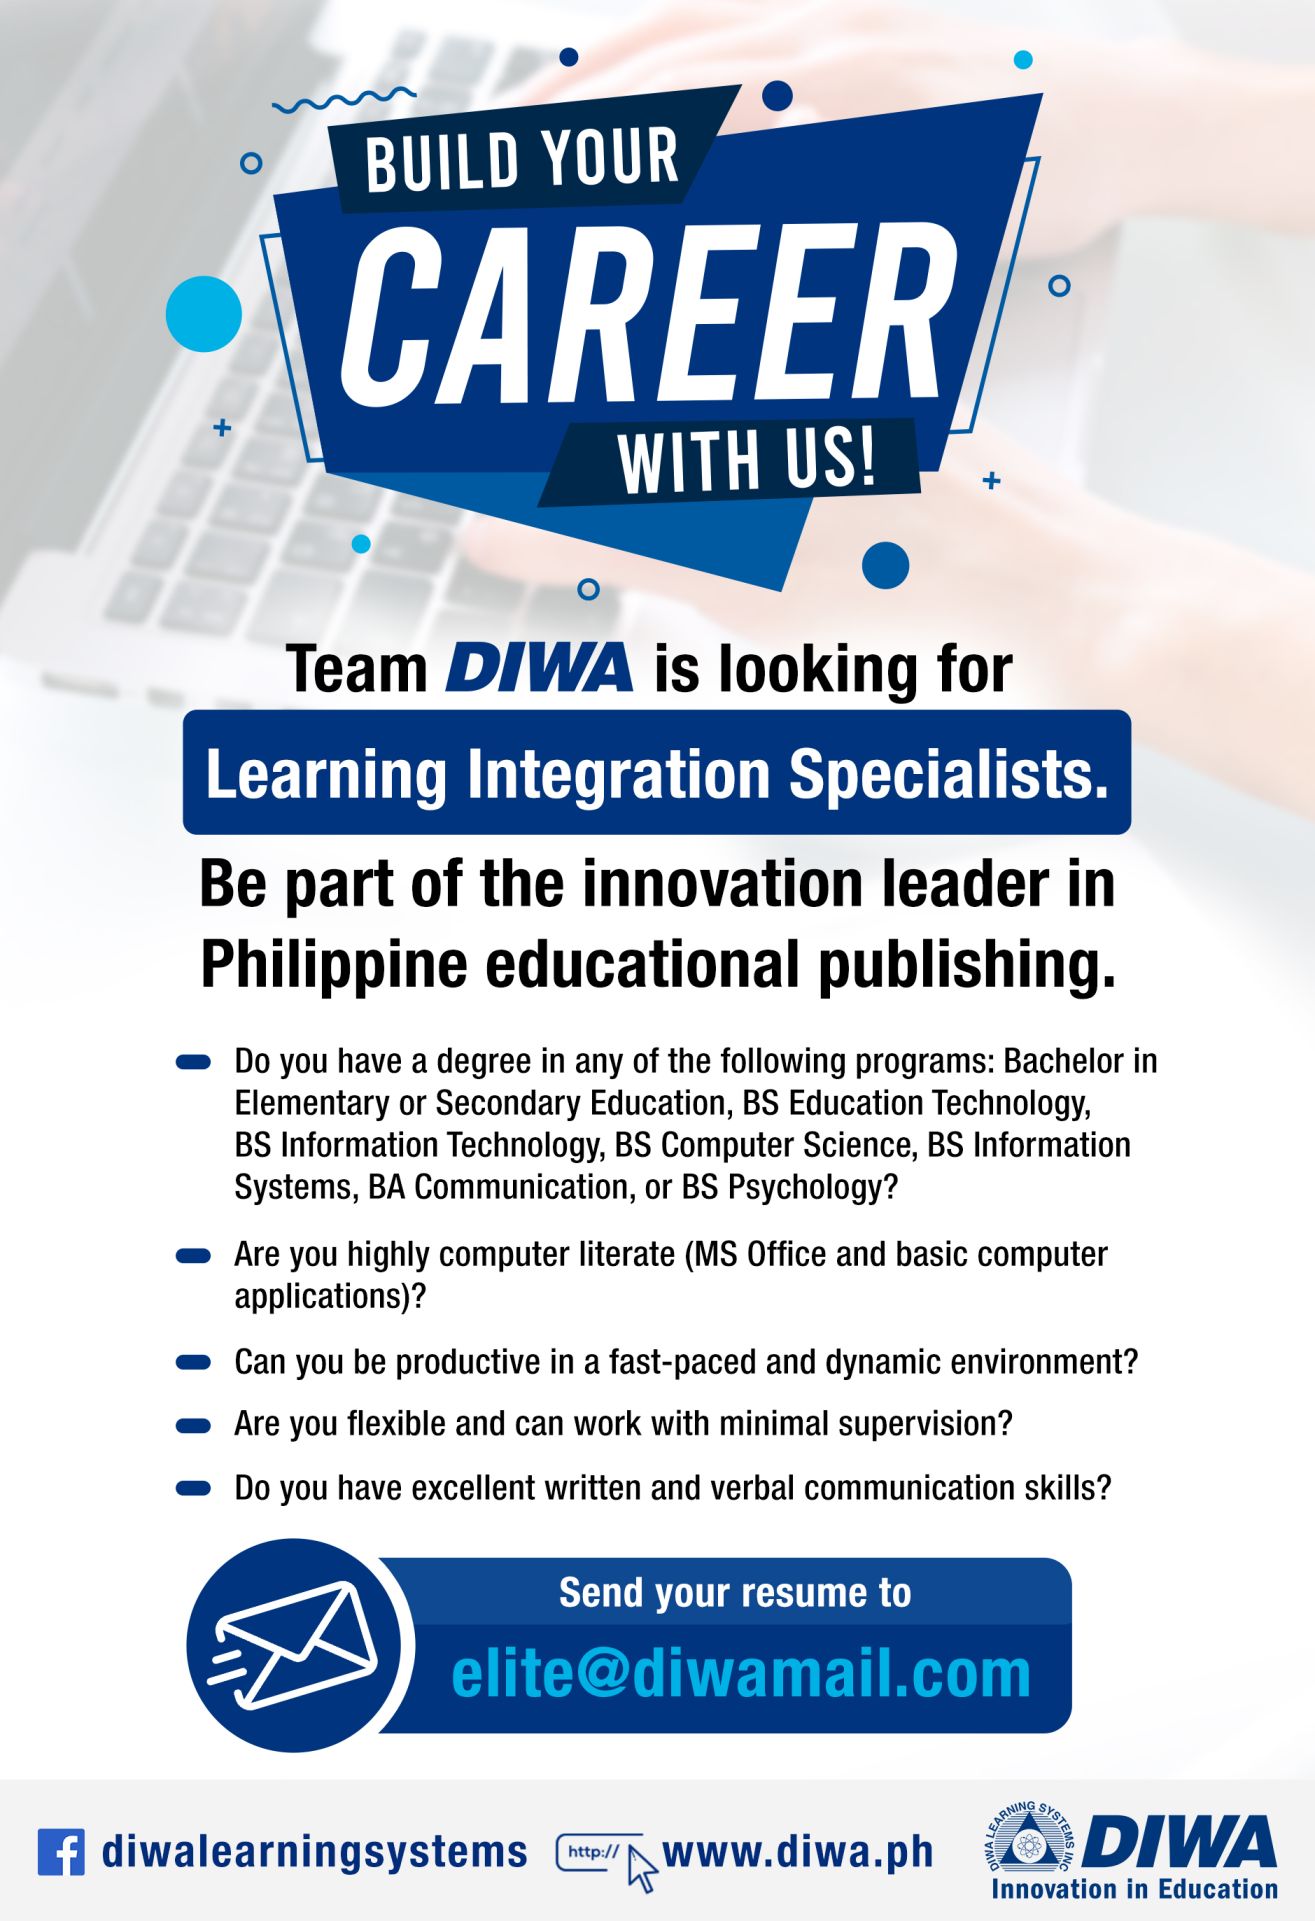 Diwa Learning Systems is looking for Learning Integration Specialists